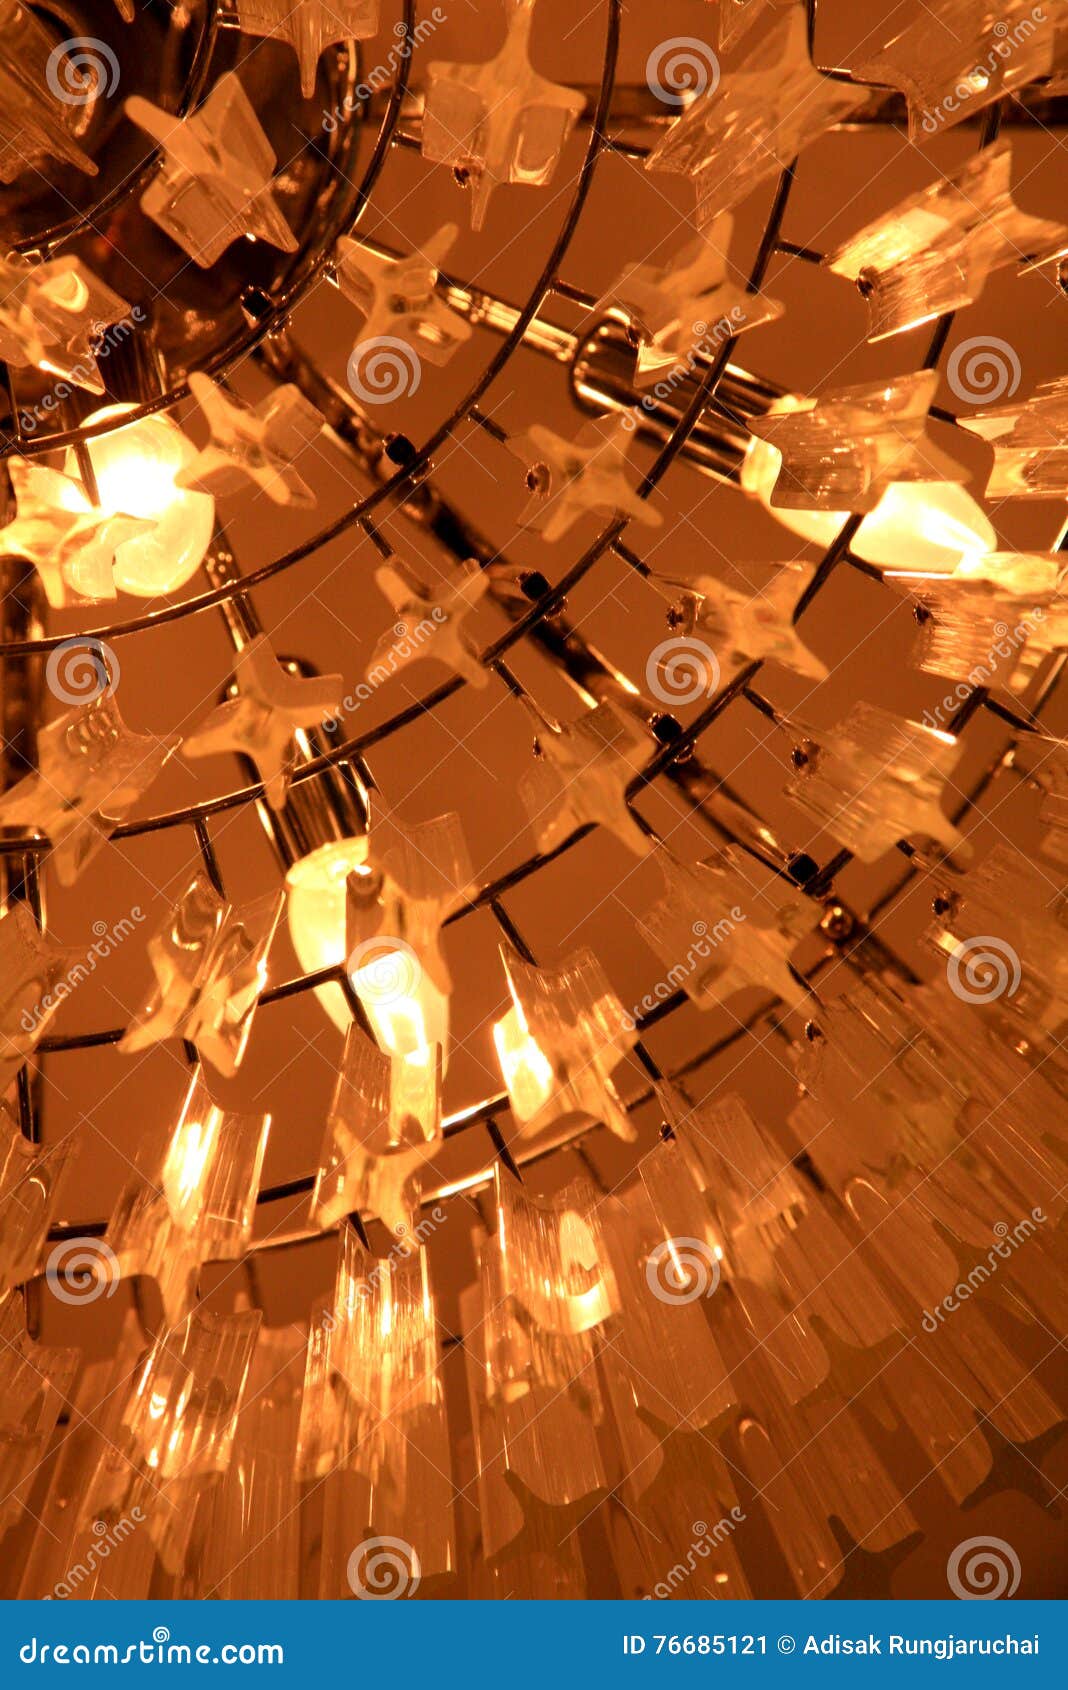 Hanging lamps on ceiling stock image. Image of background - 76685121